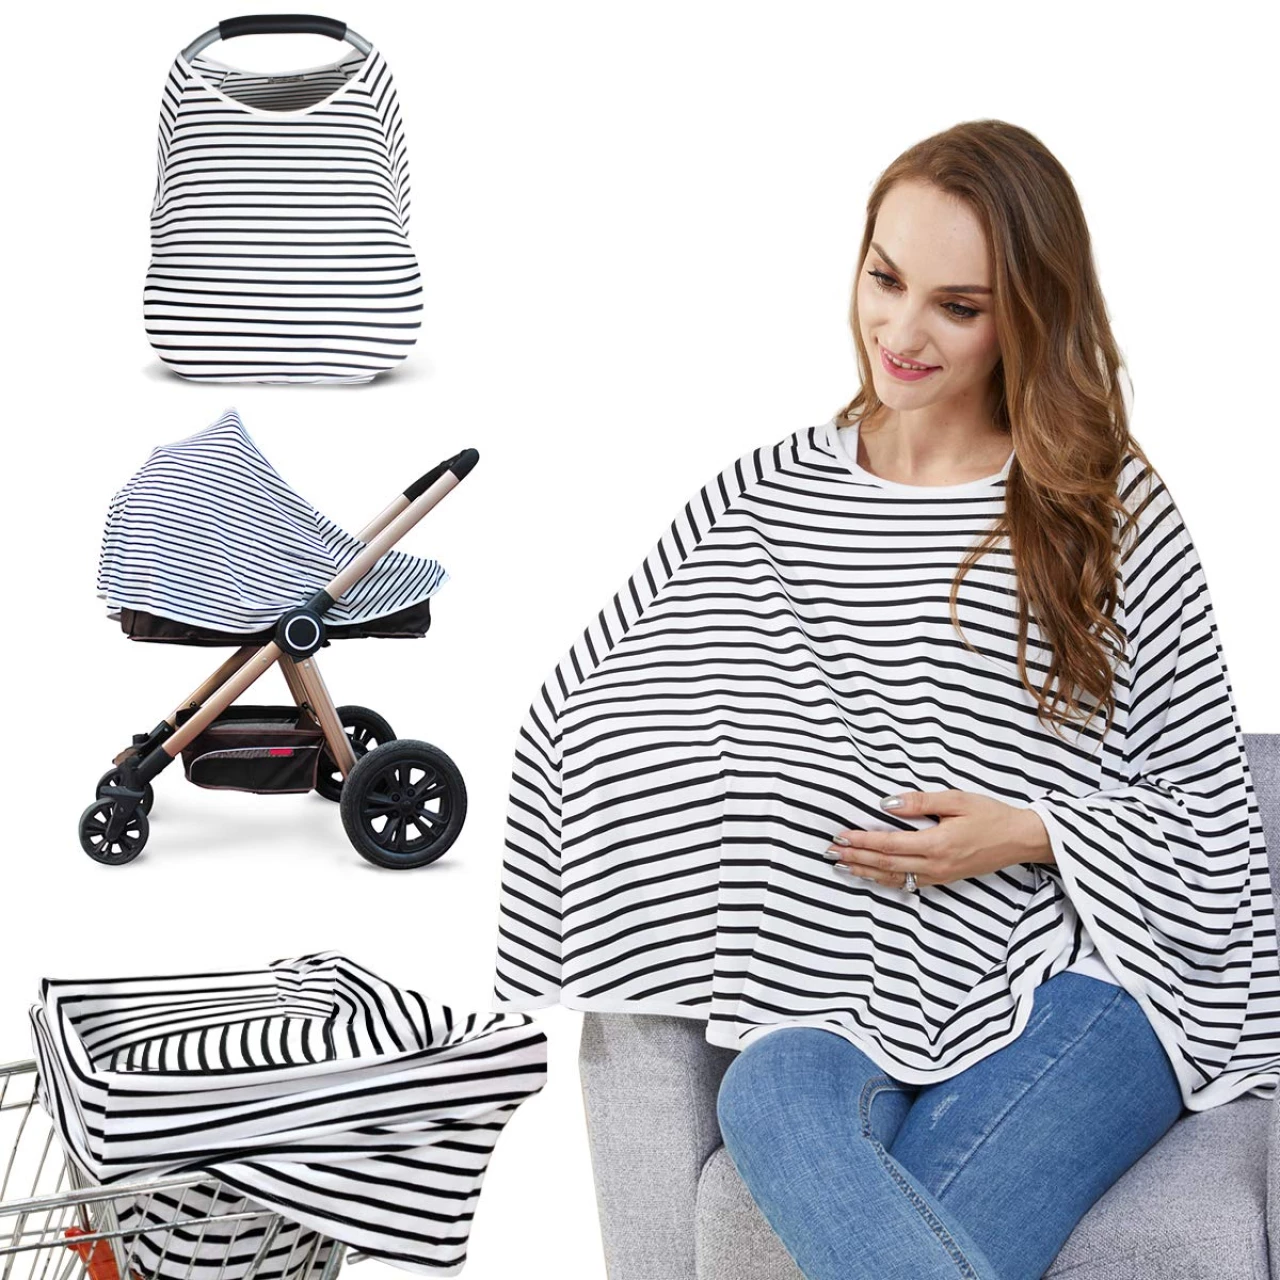 Baby Nursing Cover &amp; Nursing Poncho - Multi Use Cover for Baby Car Seat Canopy, Shopping Cart Cover, Stroller Cover, 360° Full Privacy Breastfeeding Coverage, Baby Shower Gifts for Boy&amp;Girl